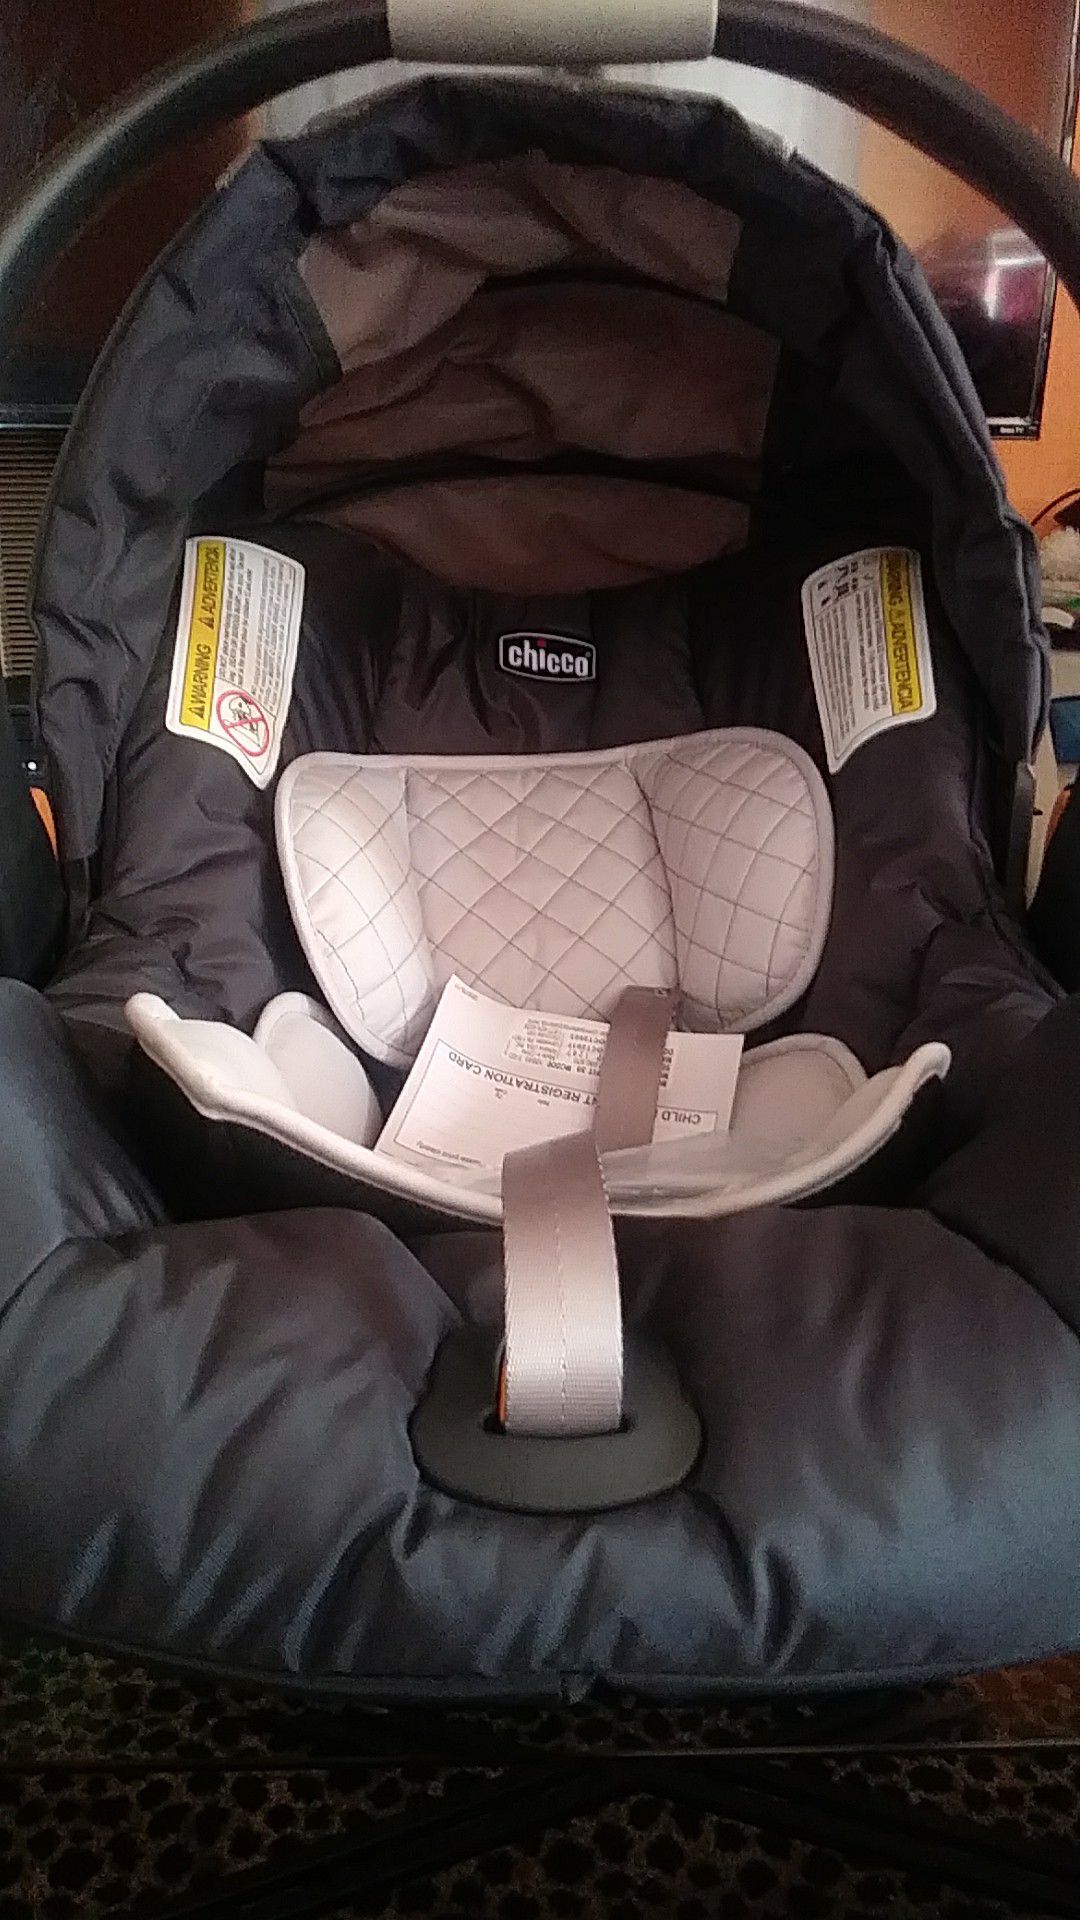 Chicco Infant car seat